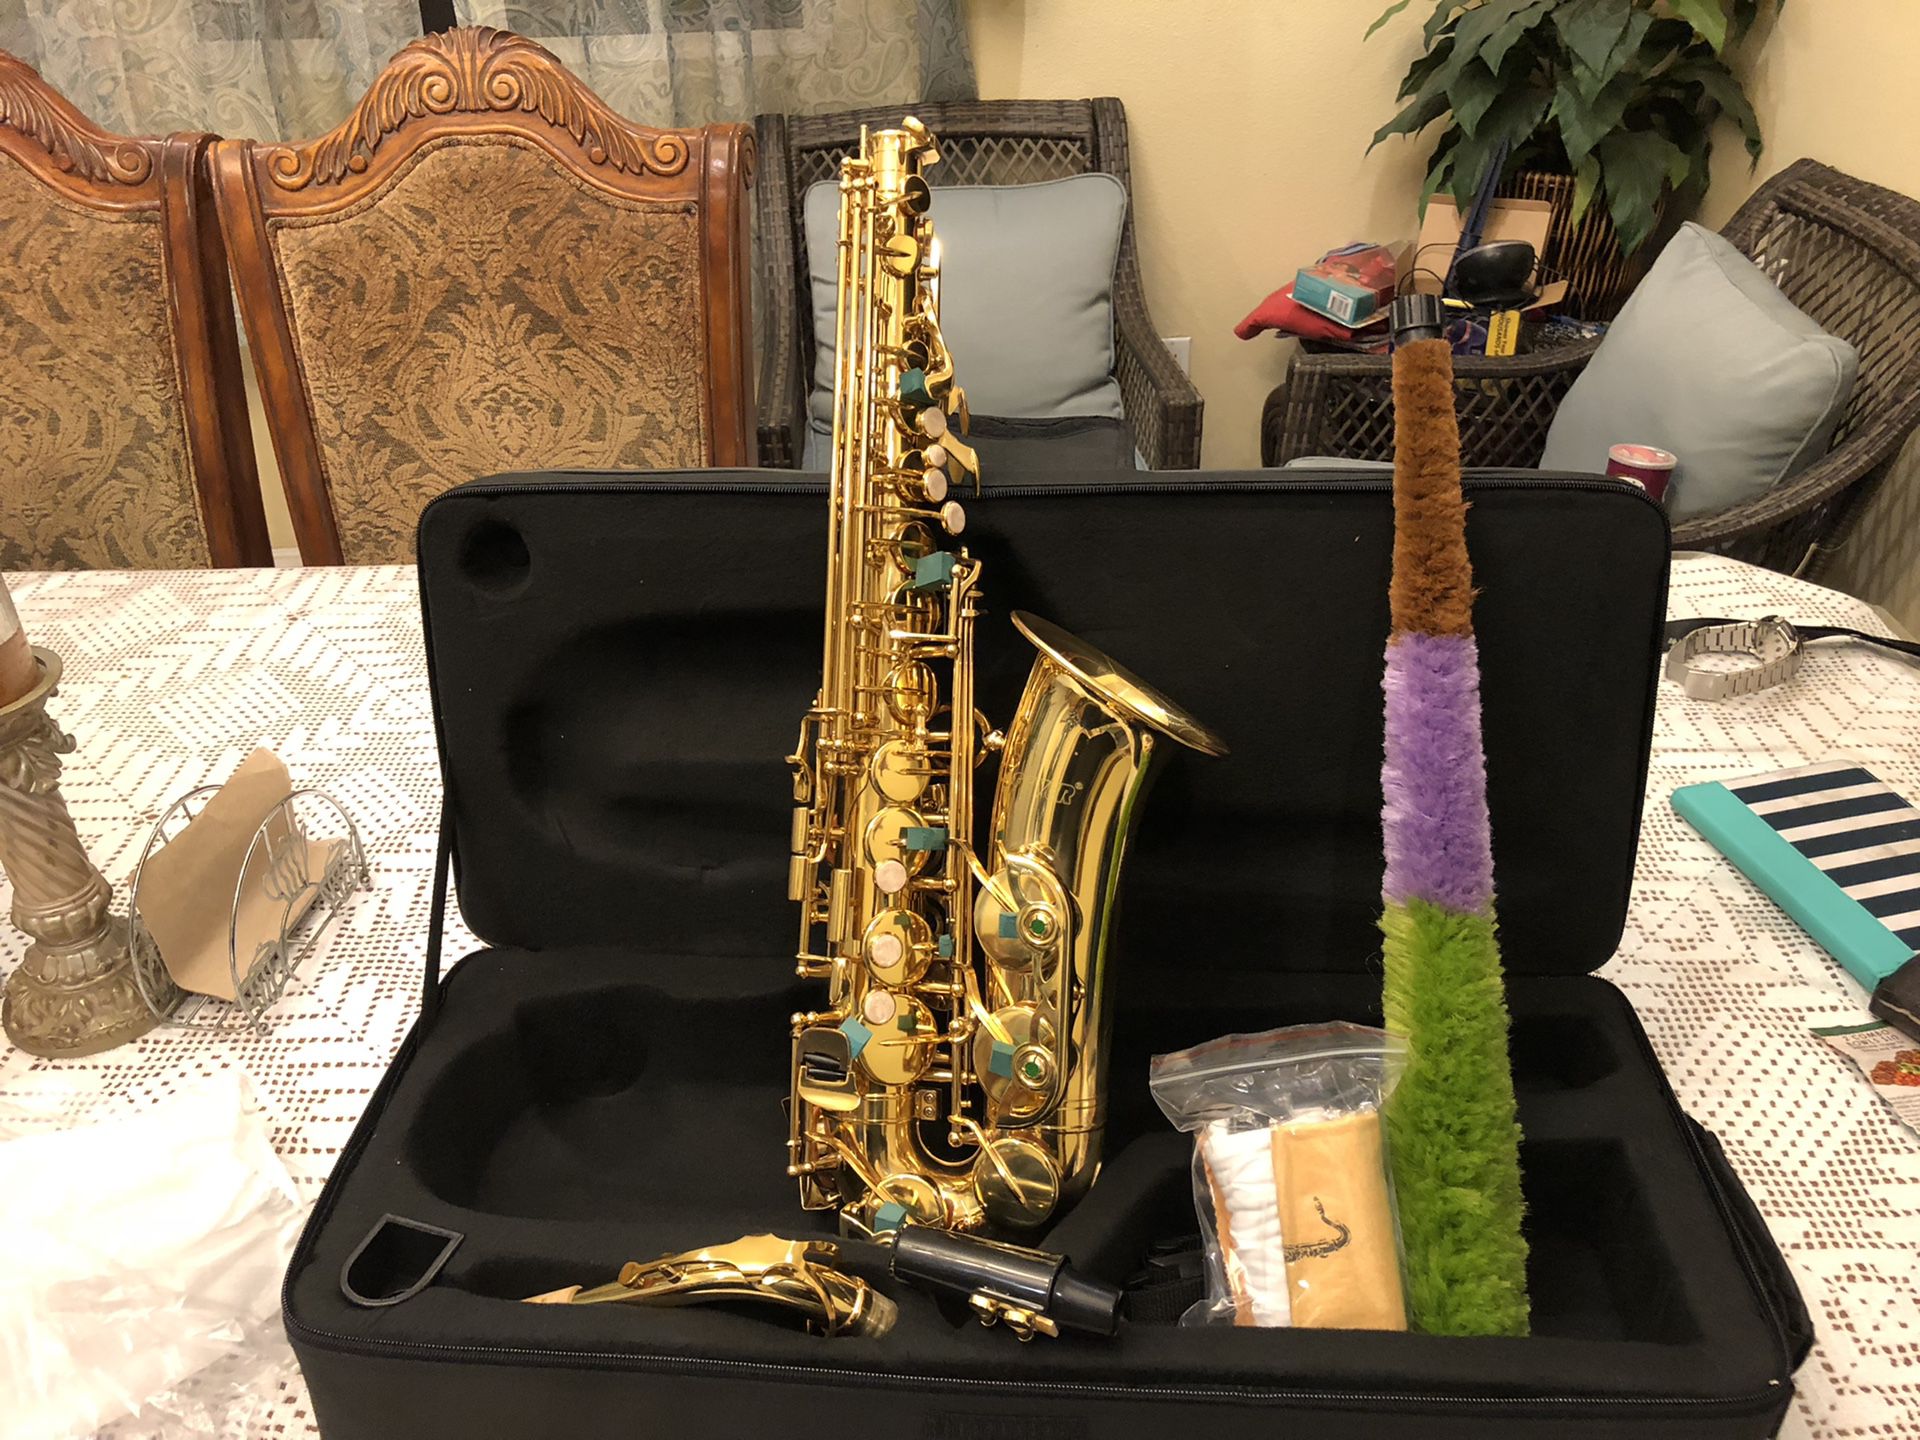 Fever alto saxophone with case mouthpiece neck strap cleaning cloth and gloves